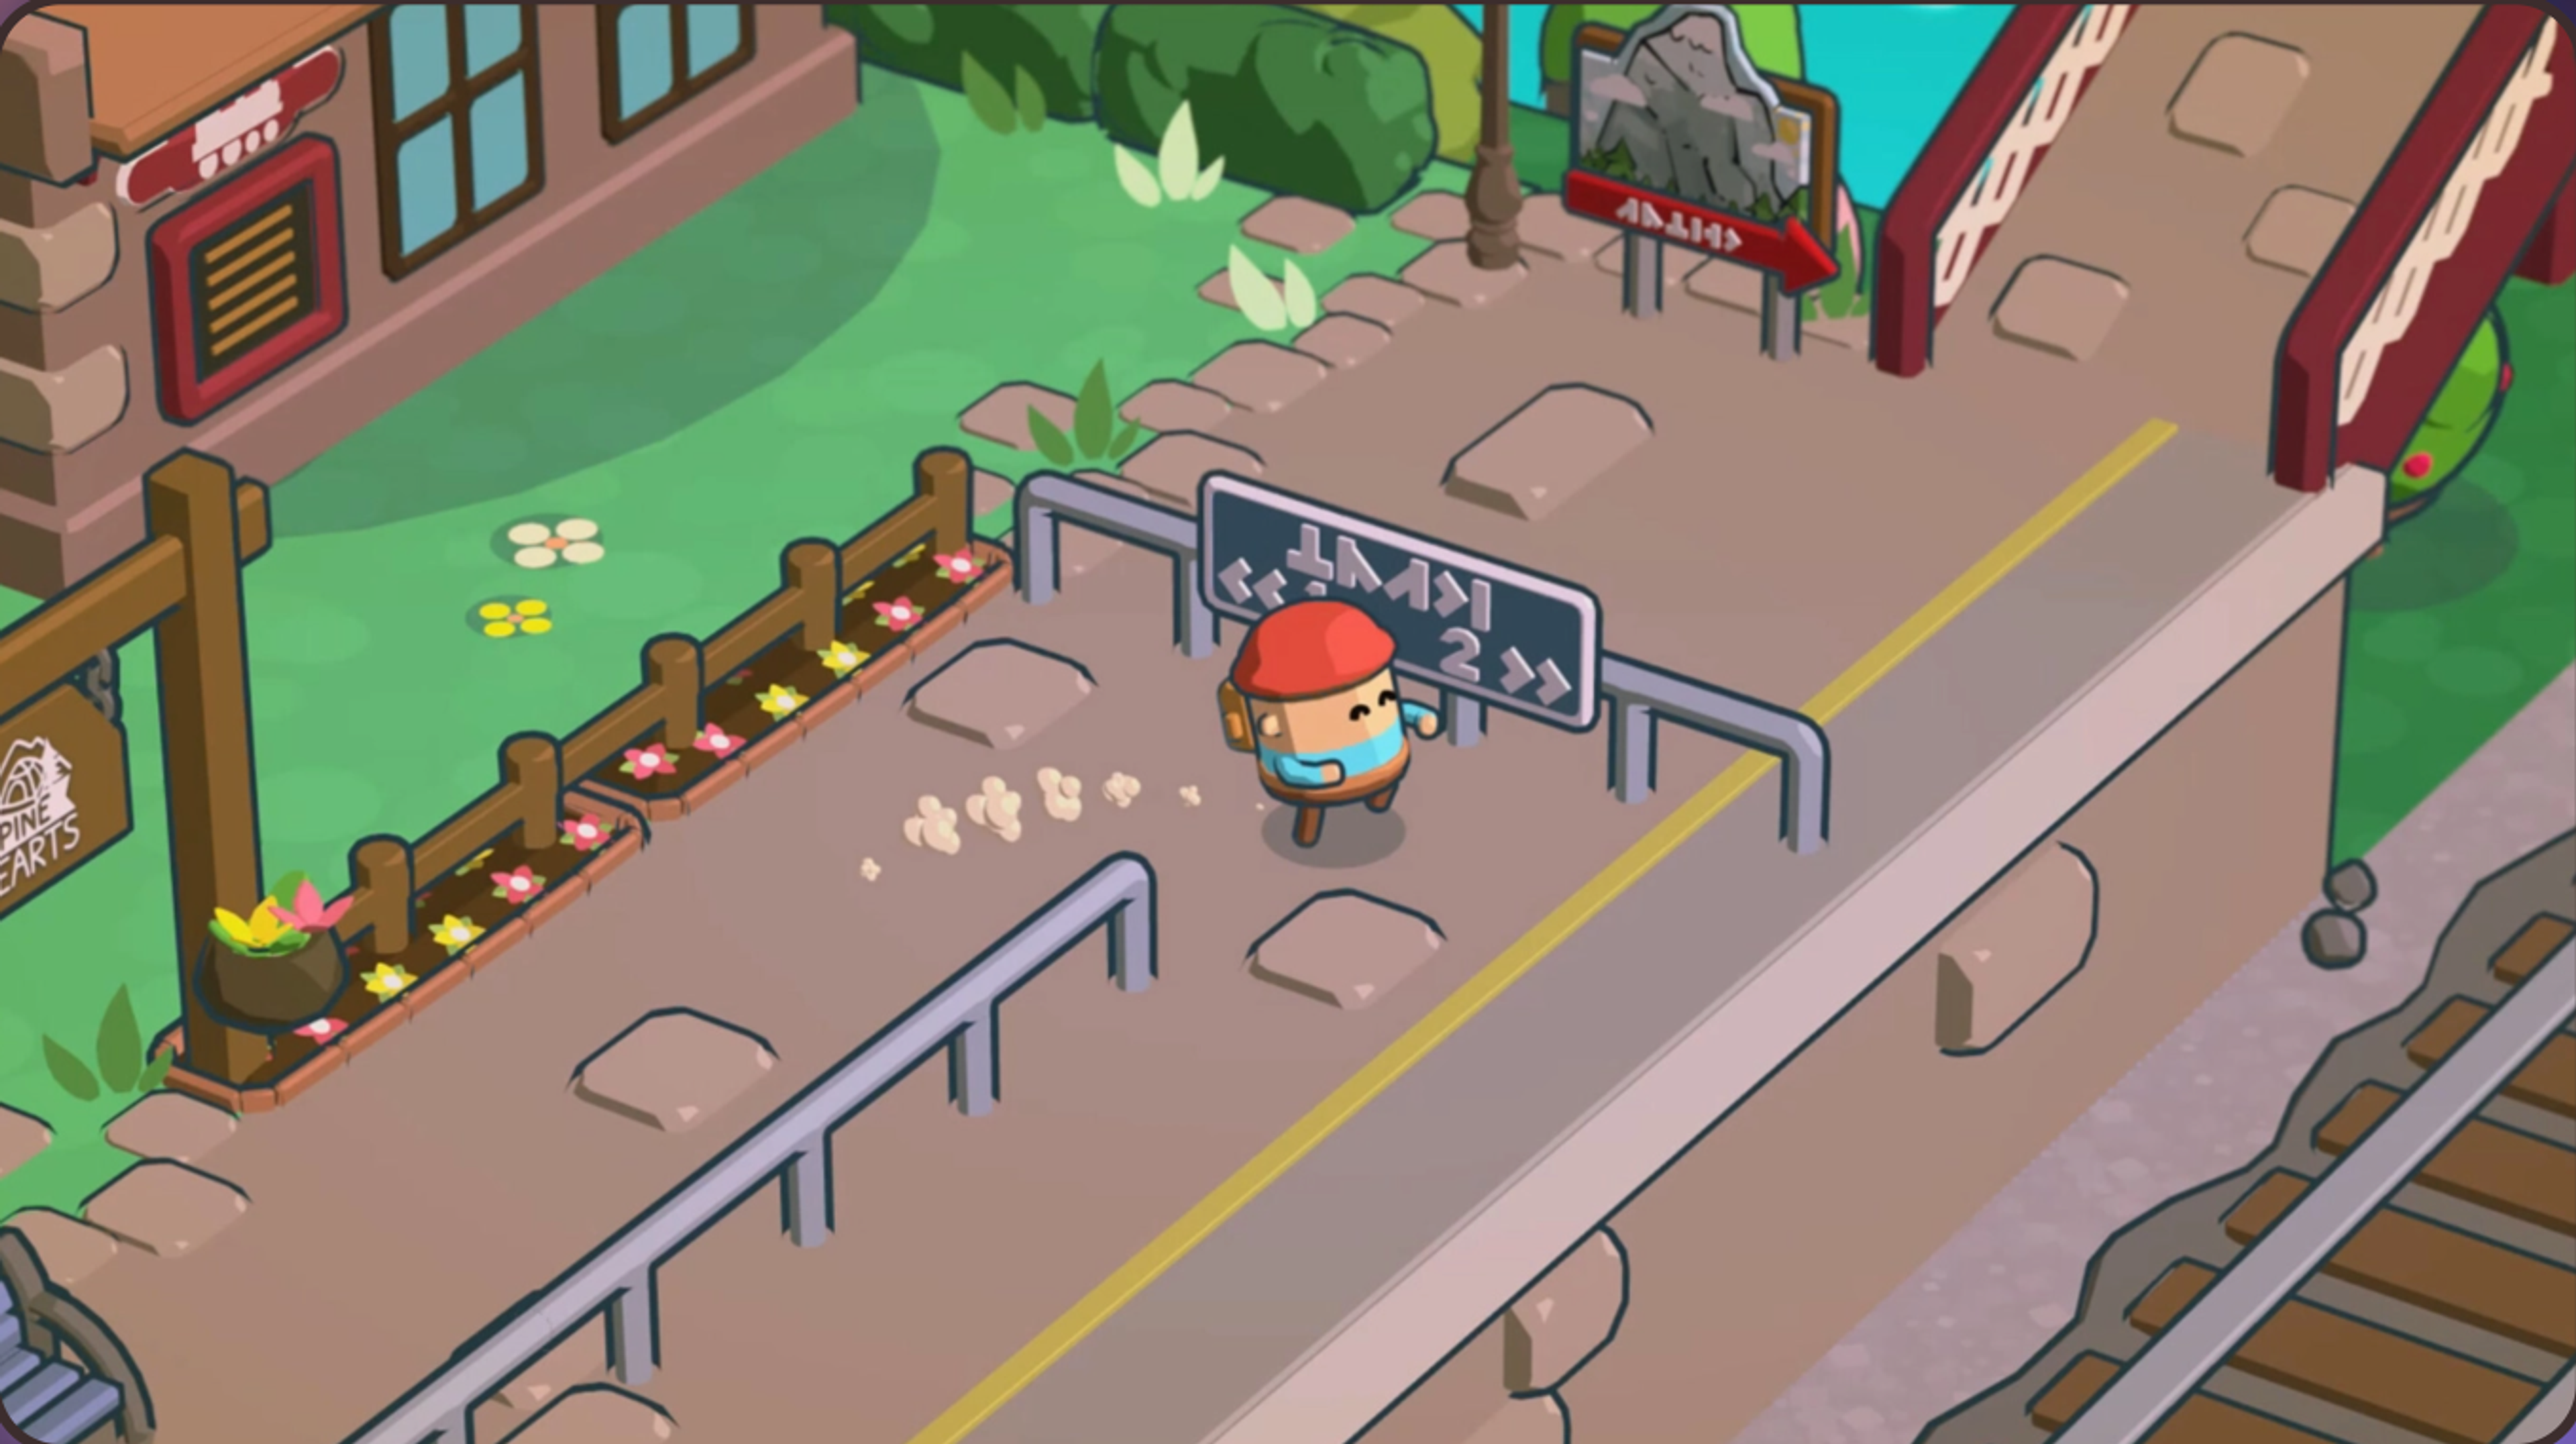 A scene from Pine Hearts, showing Tyke exploring the world